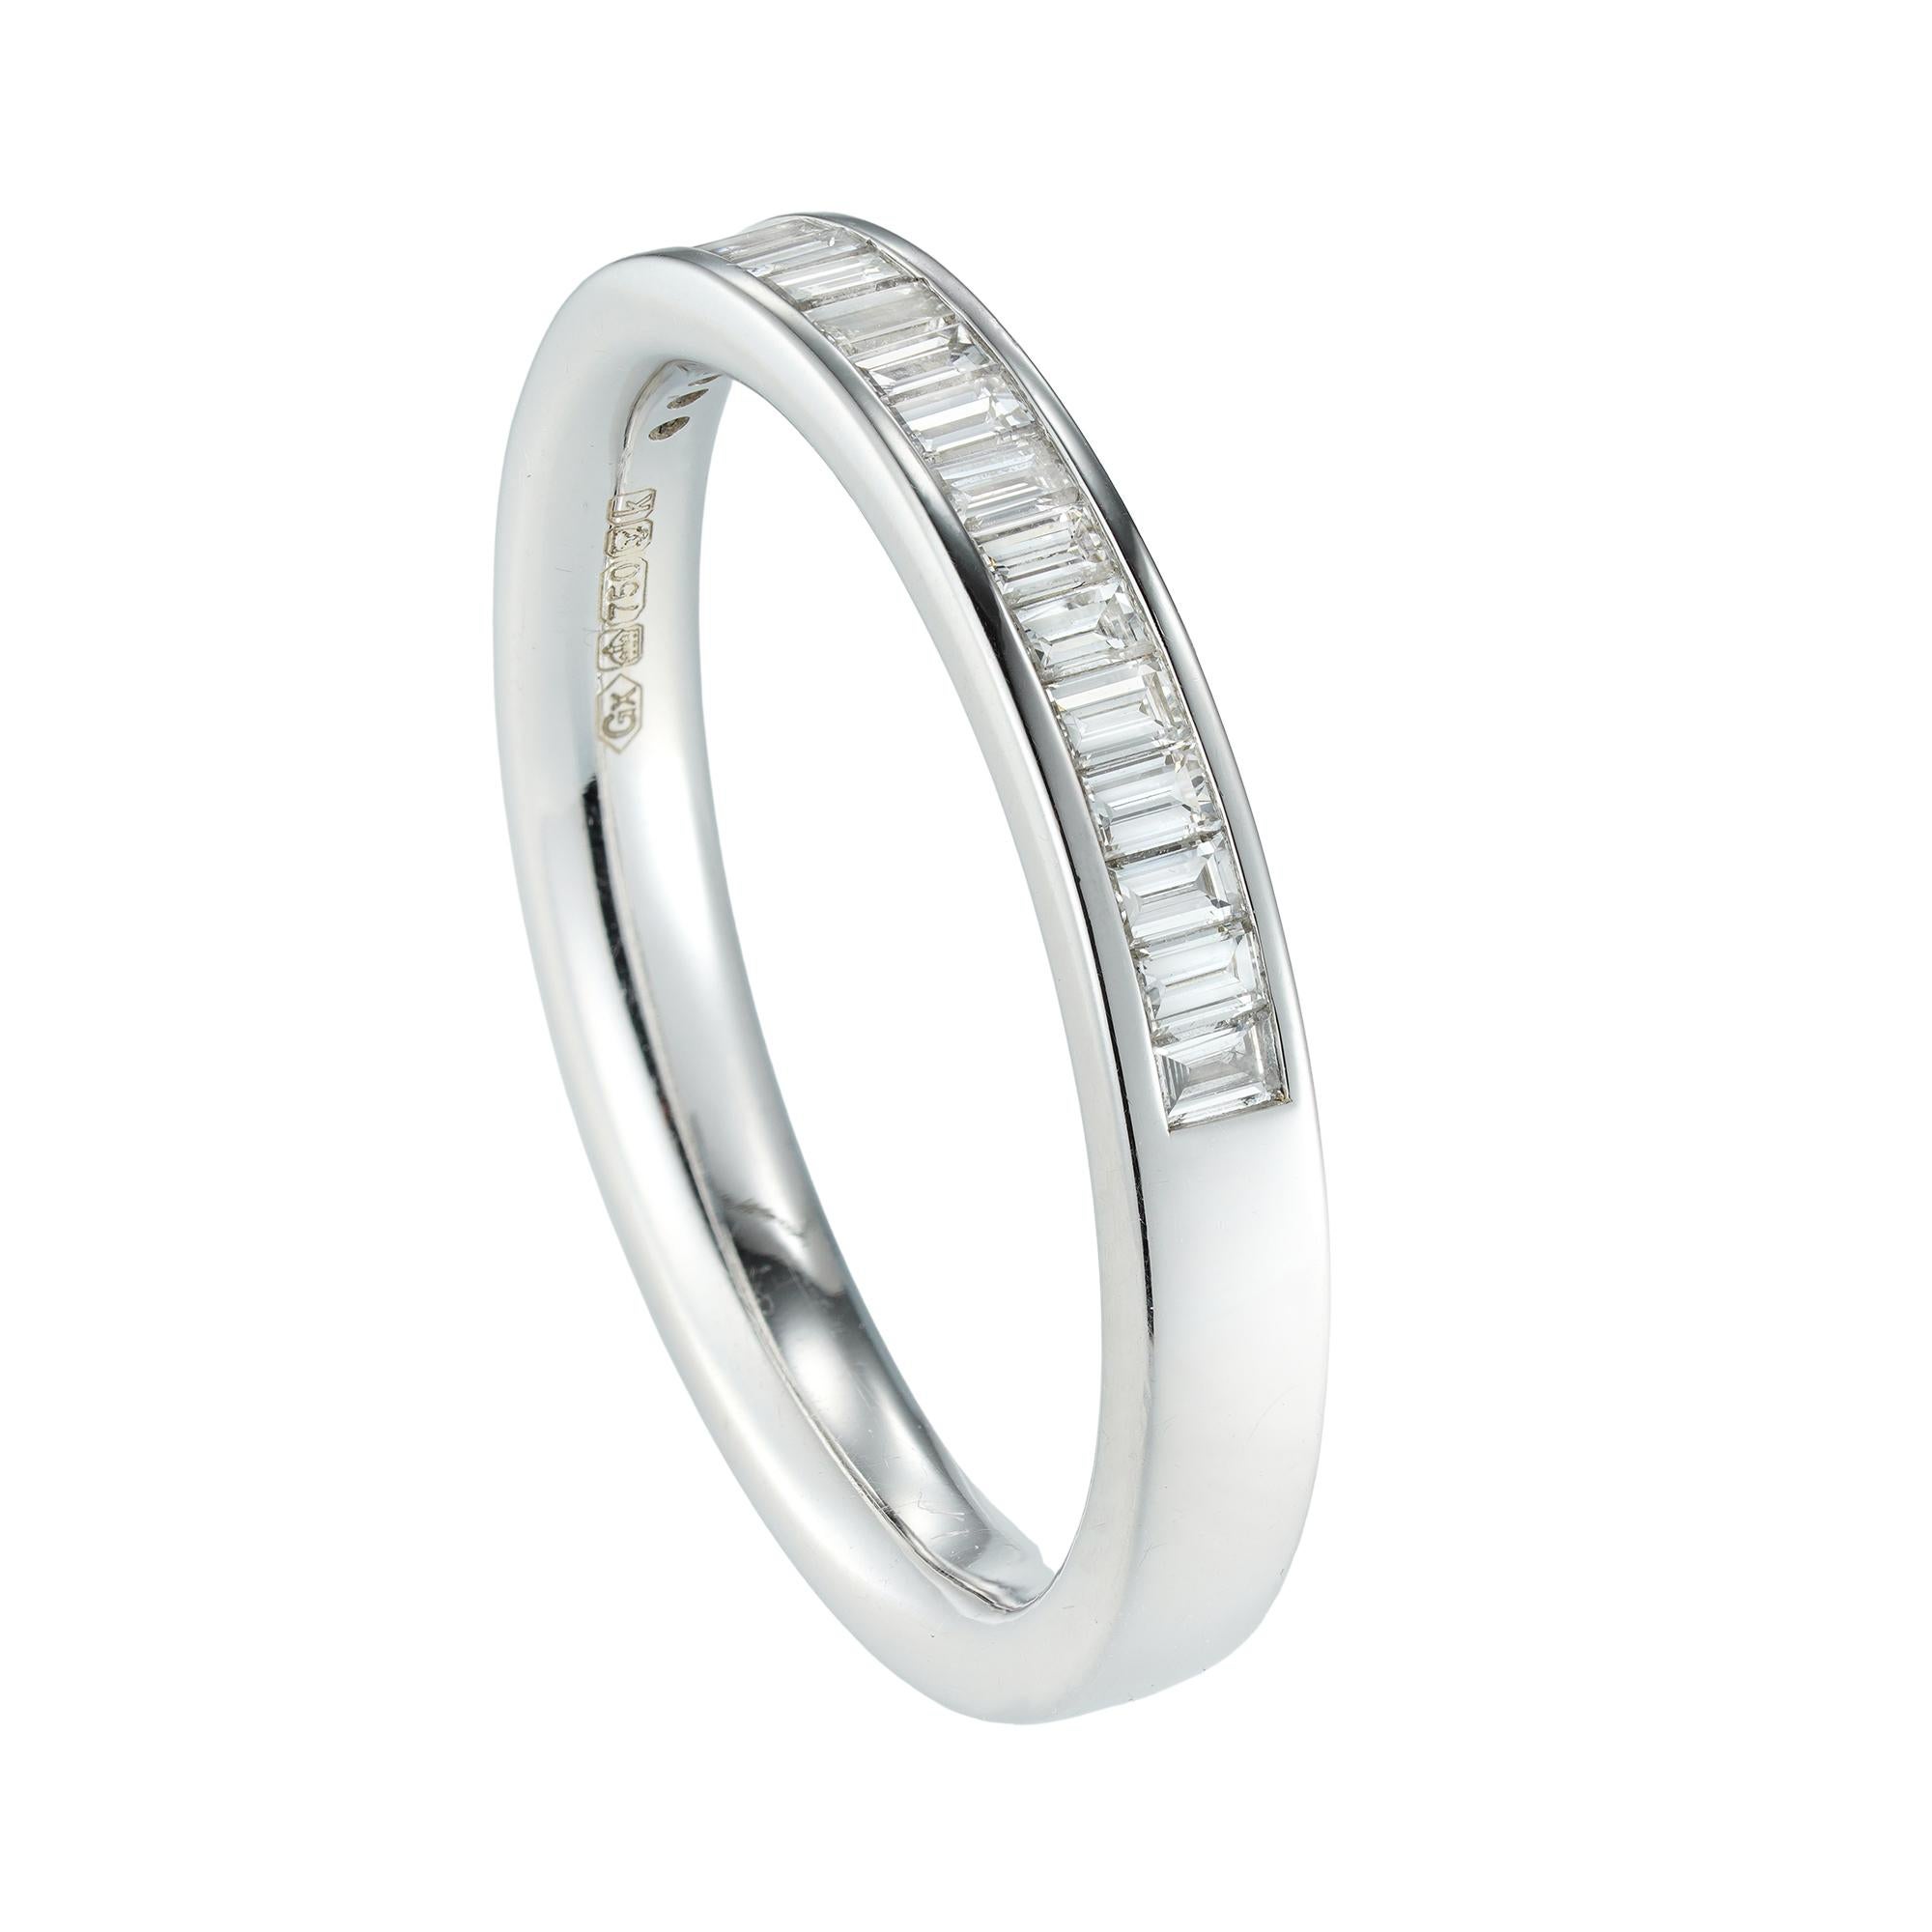 A baguette-cut diamond half eternity ring, set with nineteen baguet-cut diamonds weighing 0.33 carats in total, all channel-set in white gold mount, hallmarked 18ct gold, London 2009, measuring 3mm wide, finger size M, gross weight 3.6 grams.

This